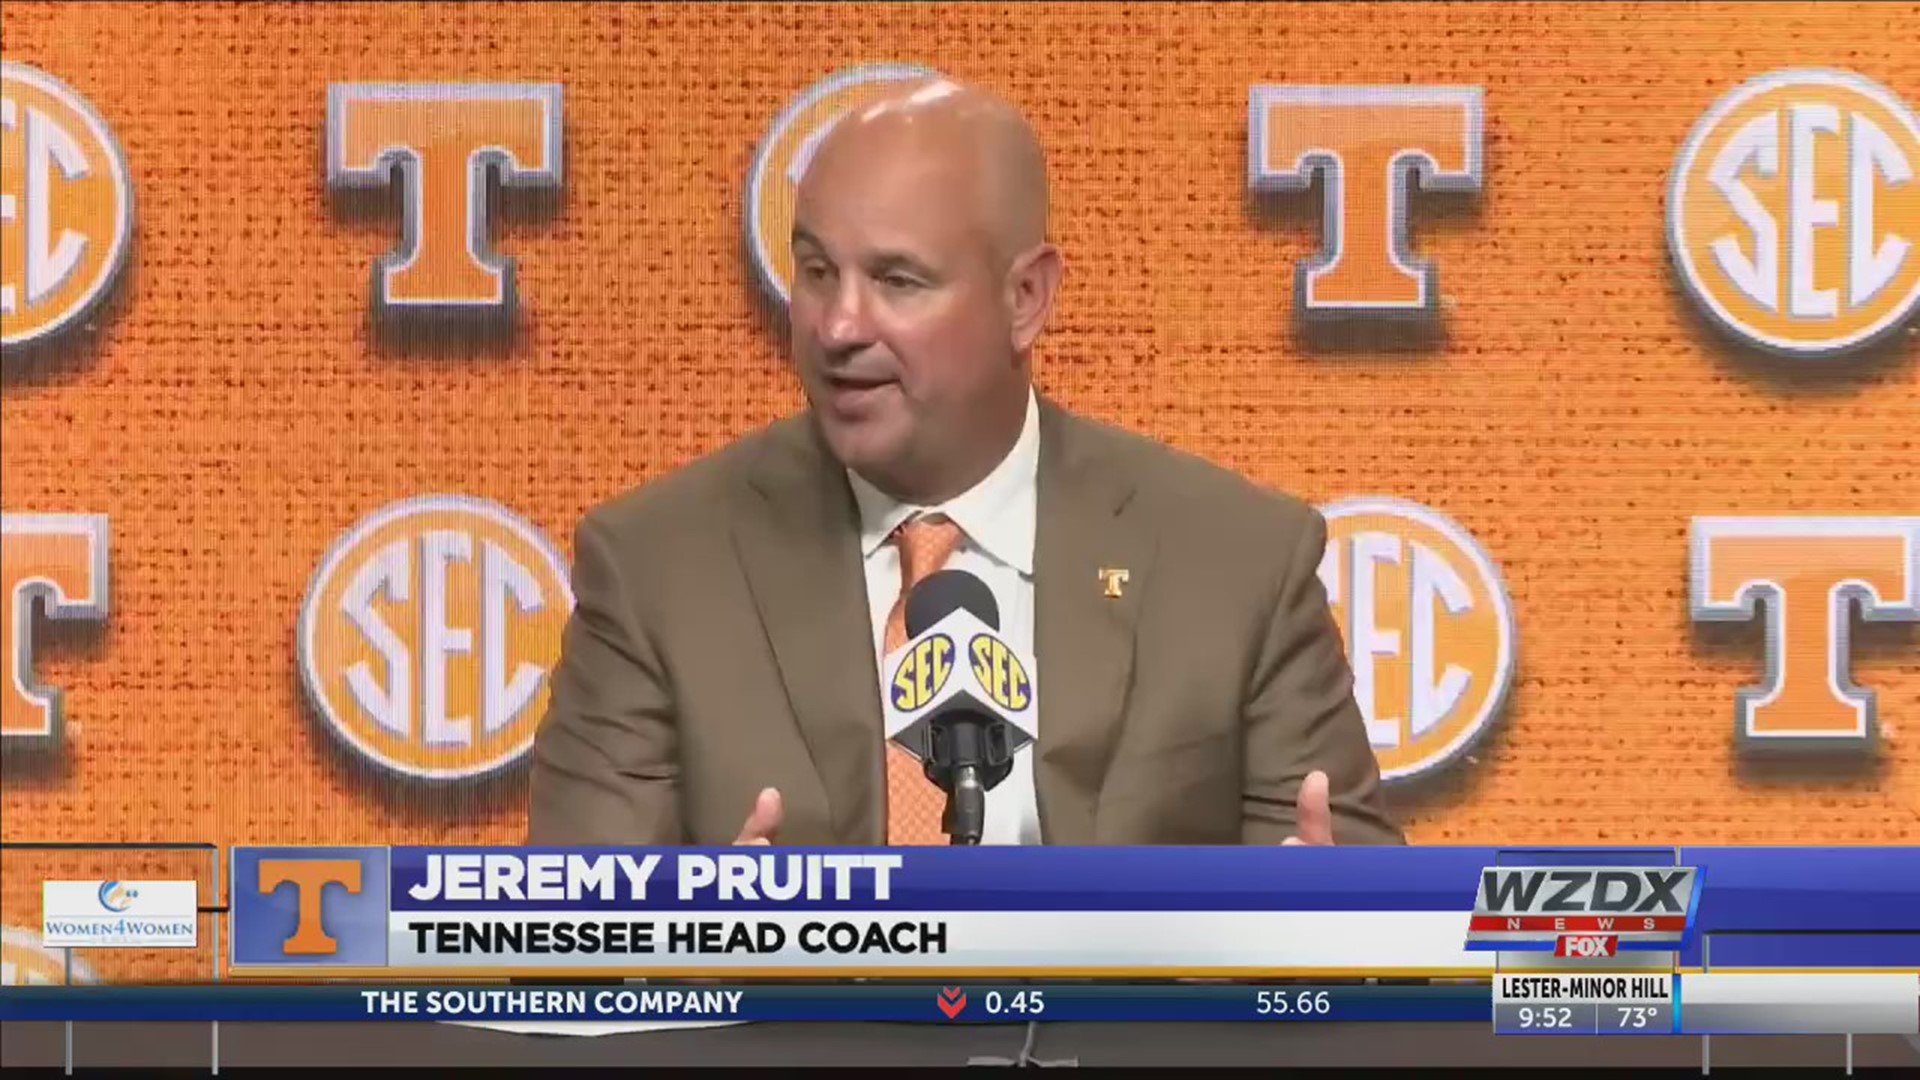 Rainsville native and current Tennessee head coach Jeremy is hoping that his team will make a huge leap in 2019 after a 5-win season last year.